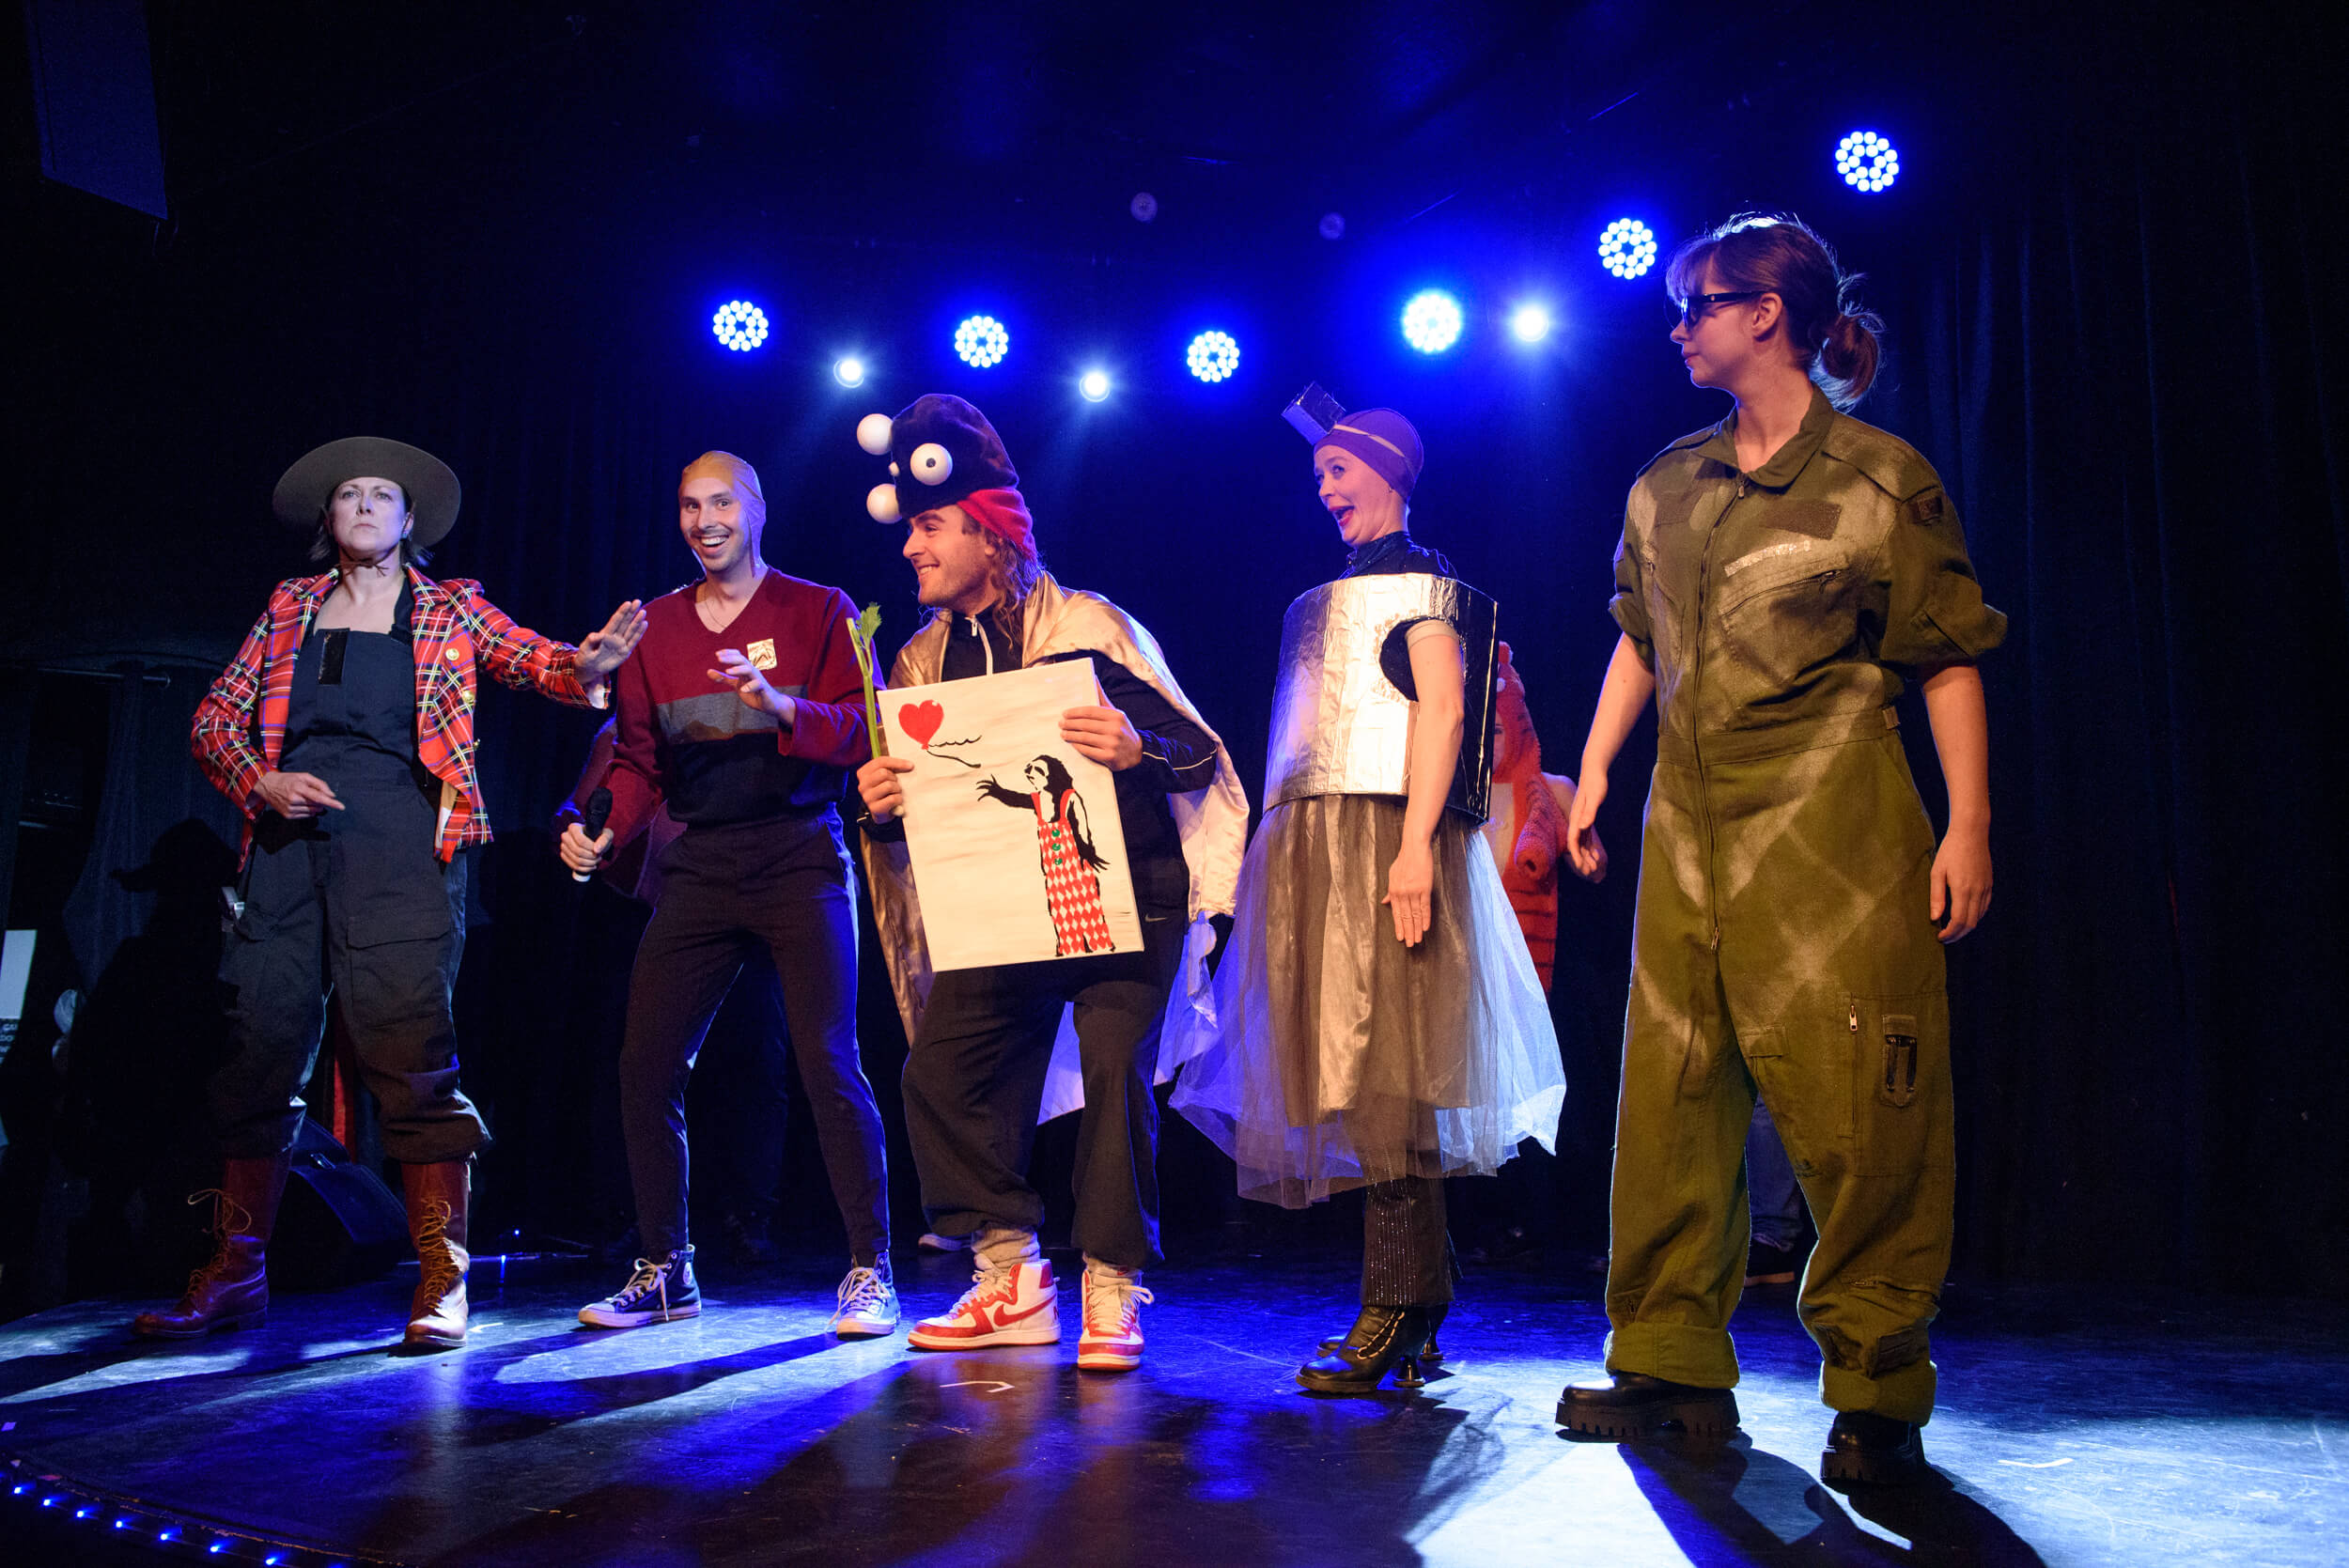 4 performers are dressed as characters from Starfield. In the middle, an audience member is holding a painting and laughing.